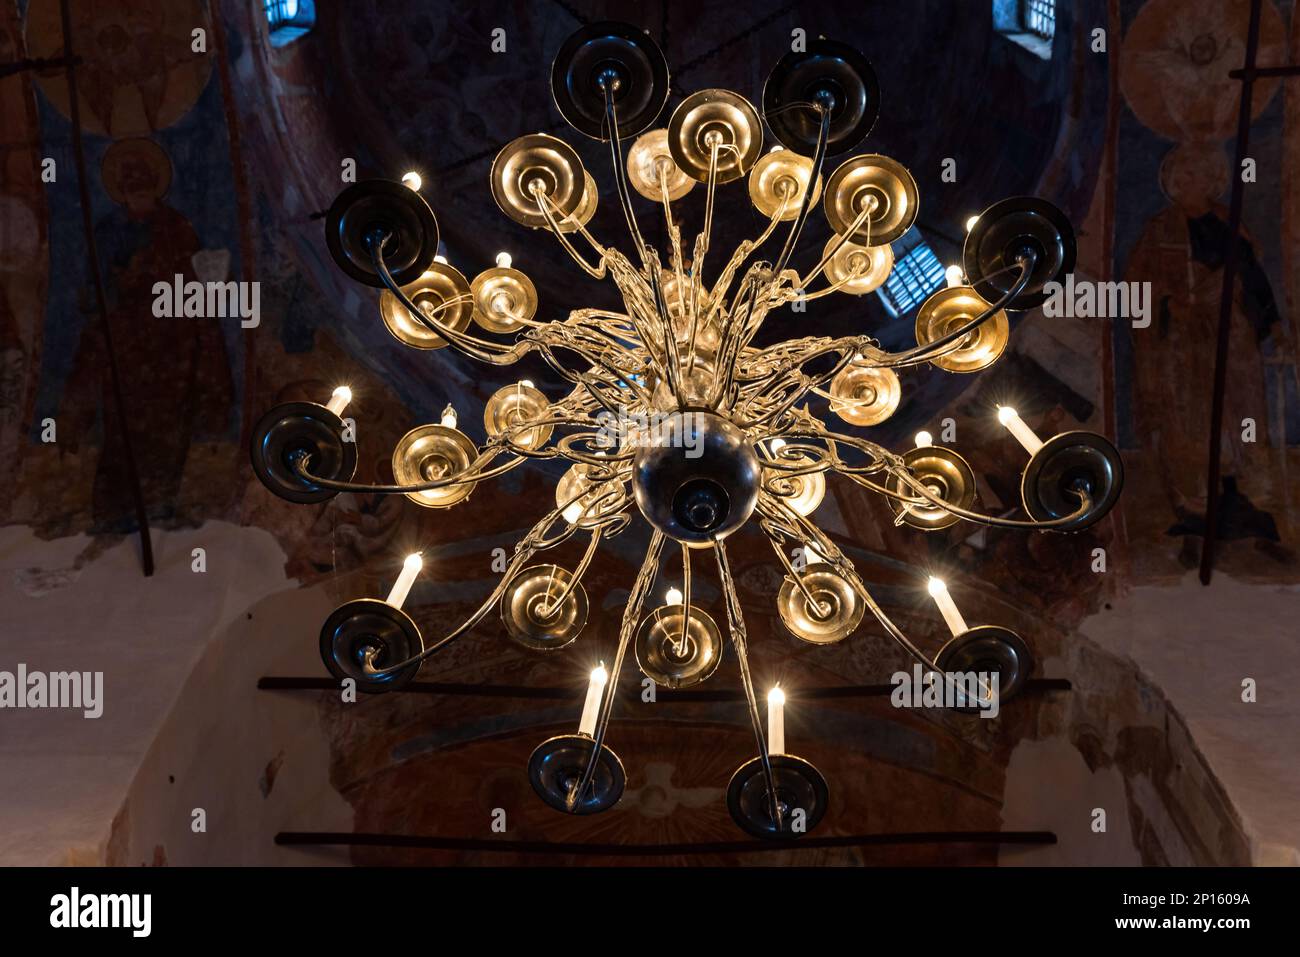 Chandelier of the Znamensky Cathedral, an inactive Orthodox church in Veliky Novgorod near the Church of the Transfiguration of the Savior on Ilyin St Stock Photo